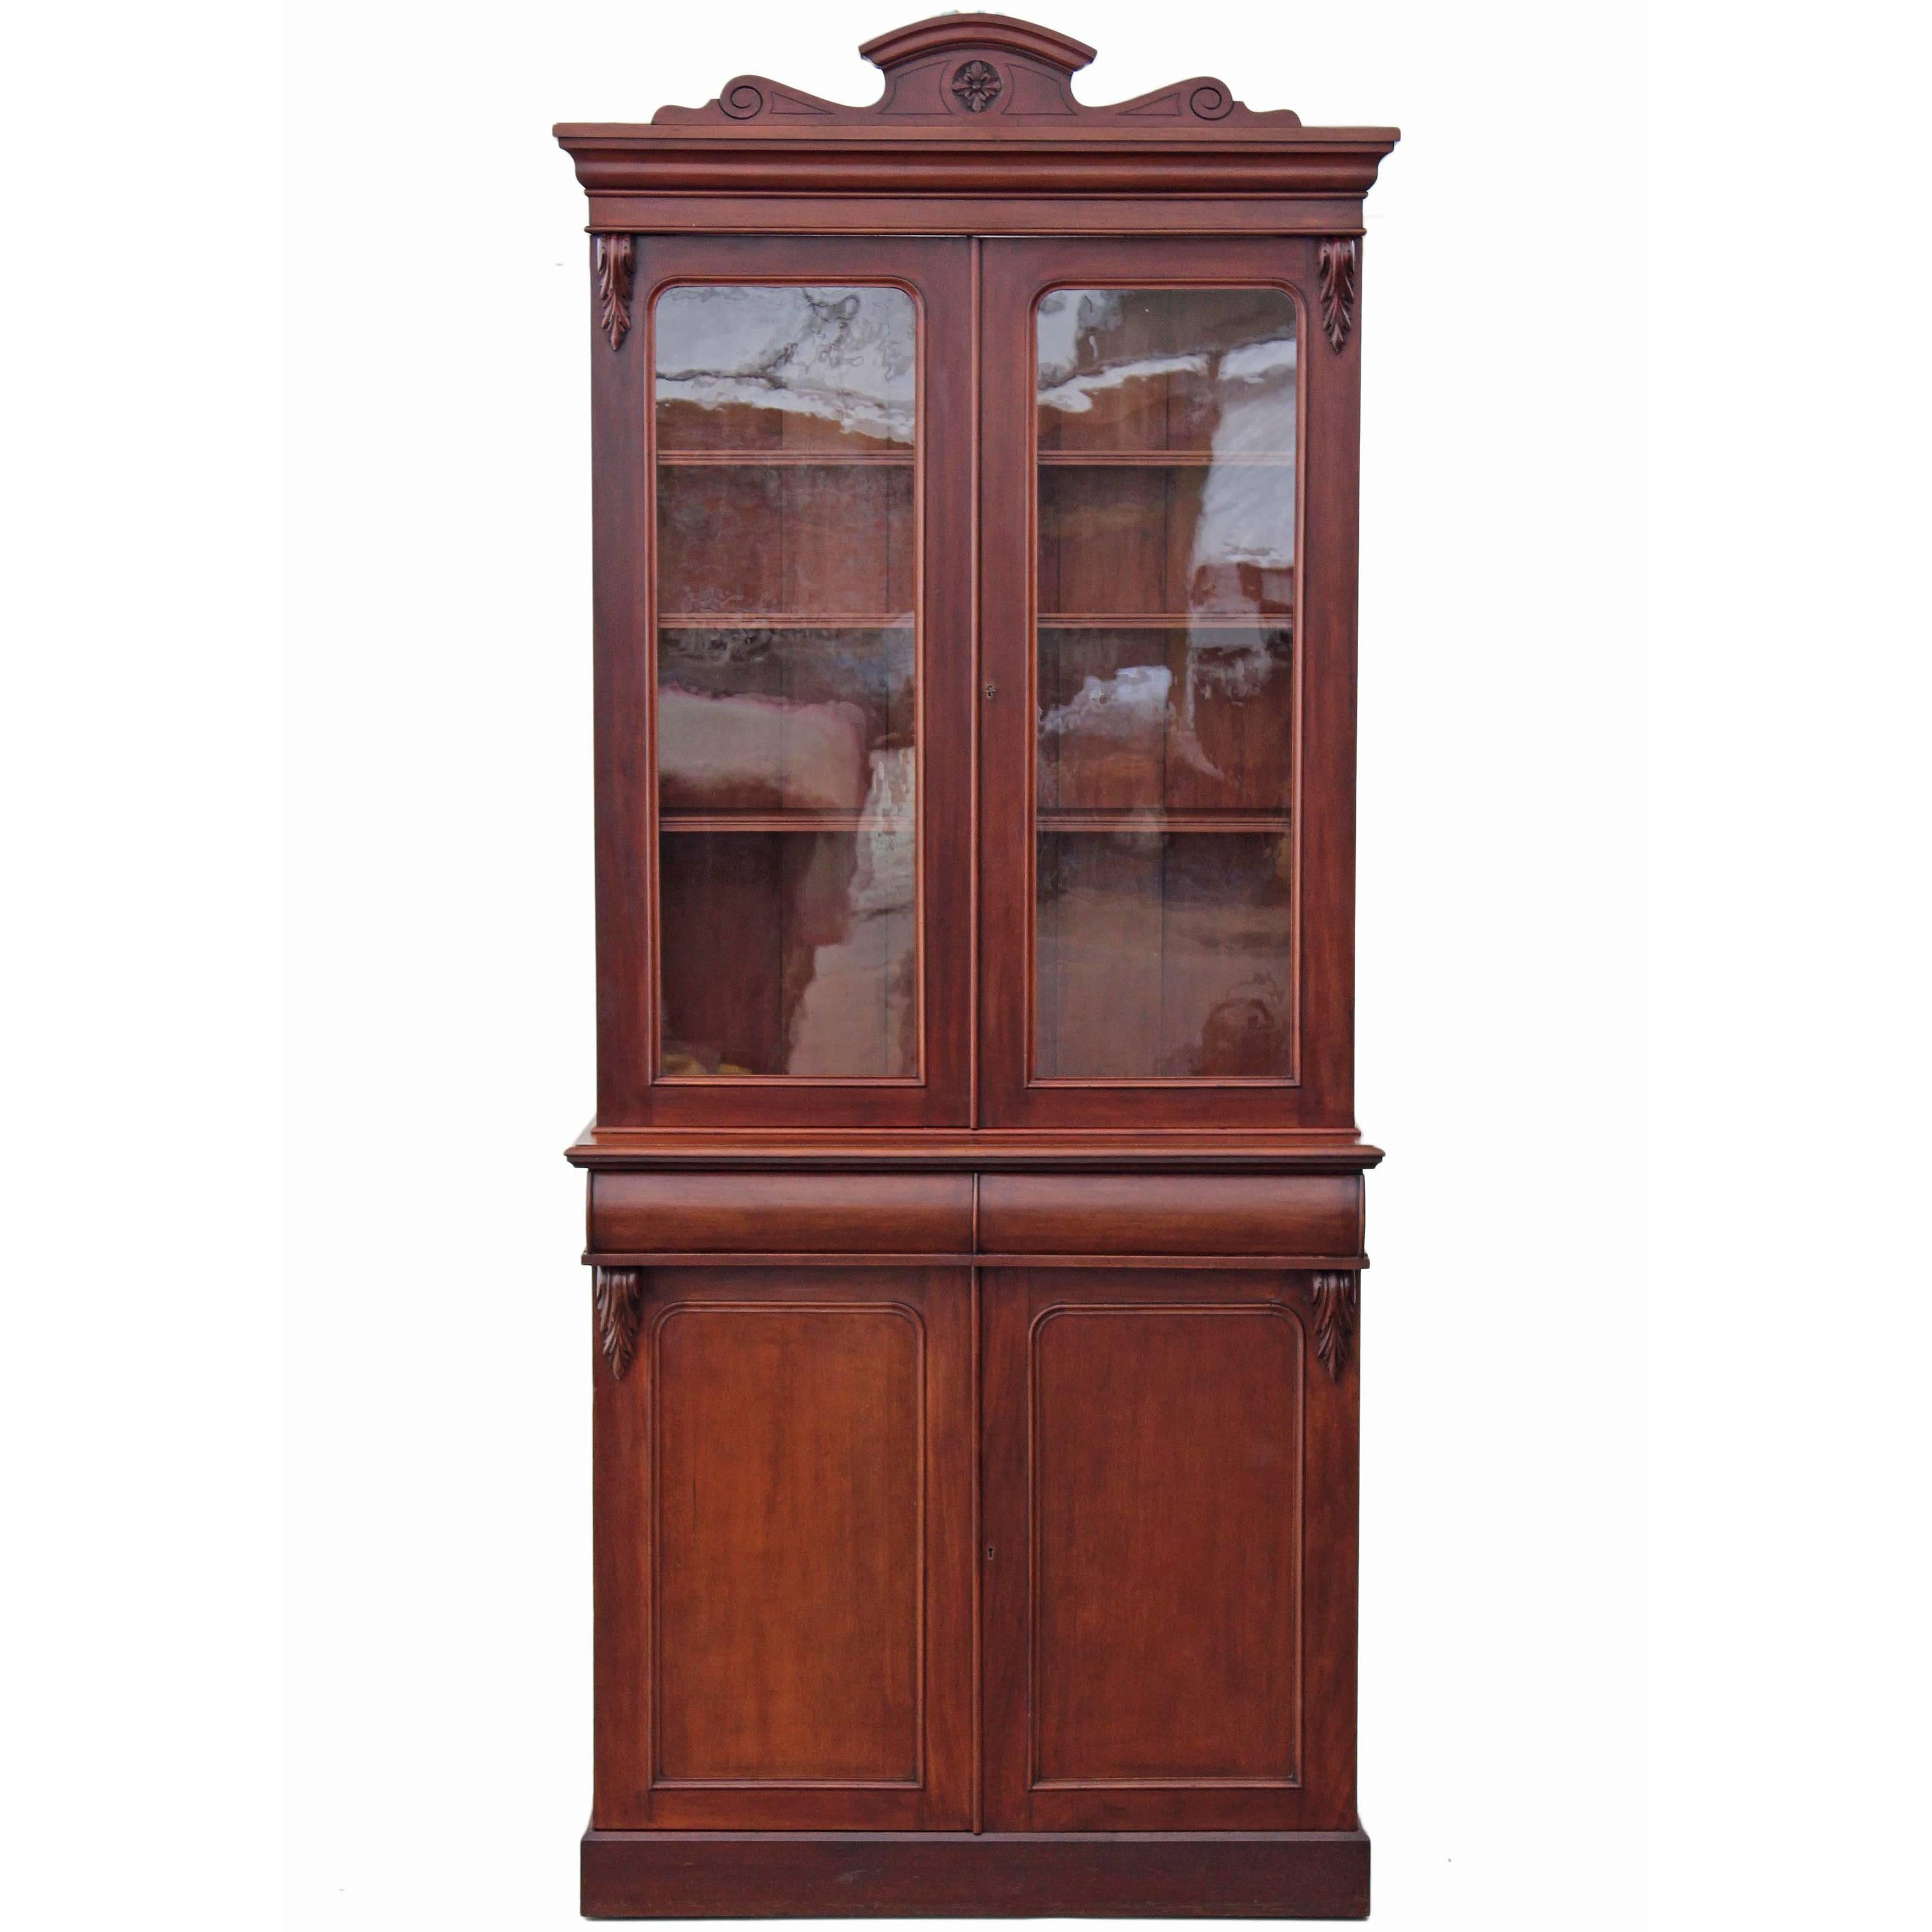 Antique Tall Victorian Mahogany Glazed Bookcase Display Cabinet Cupboard For Sale